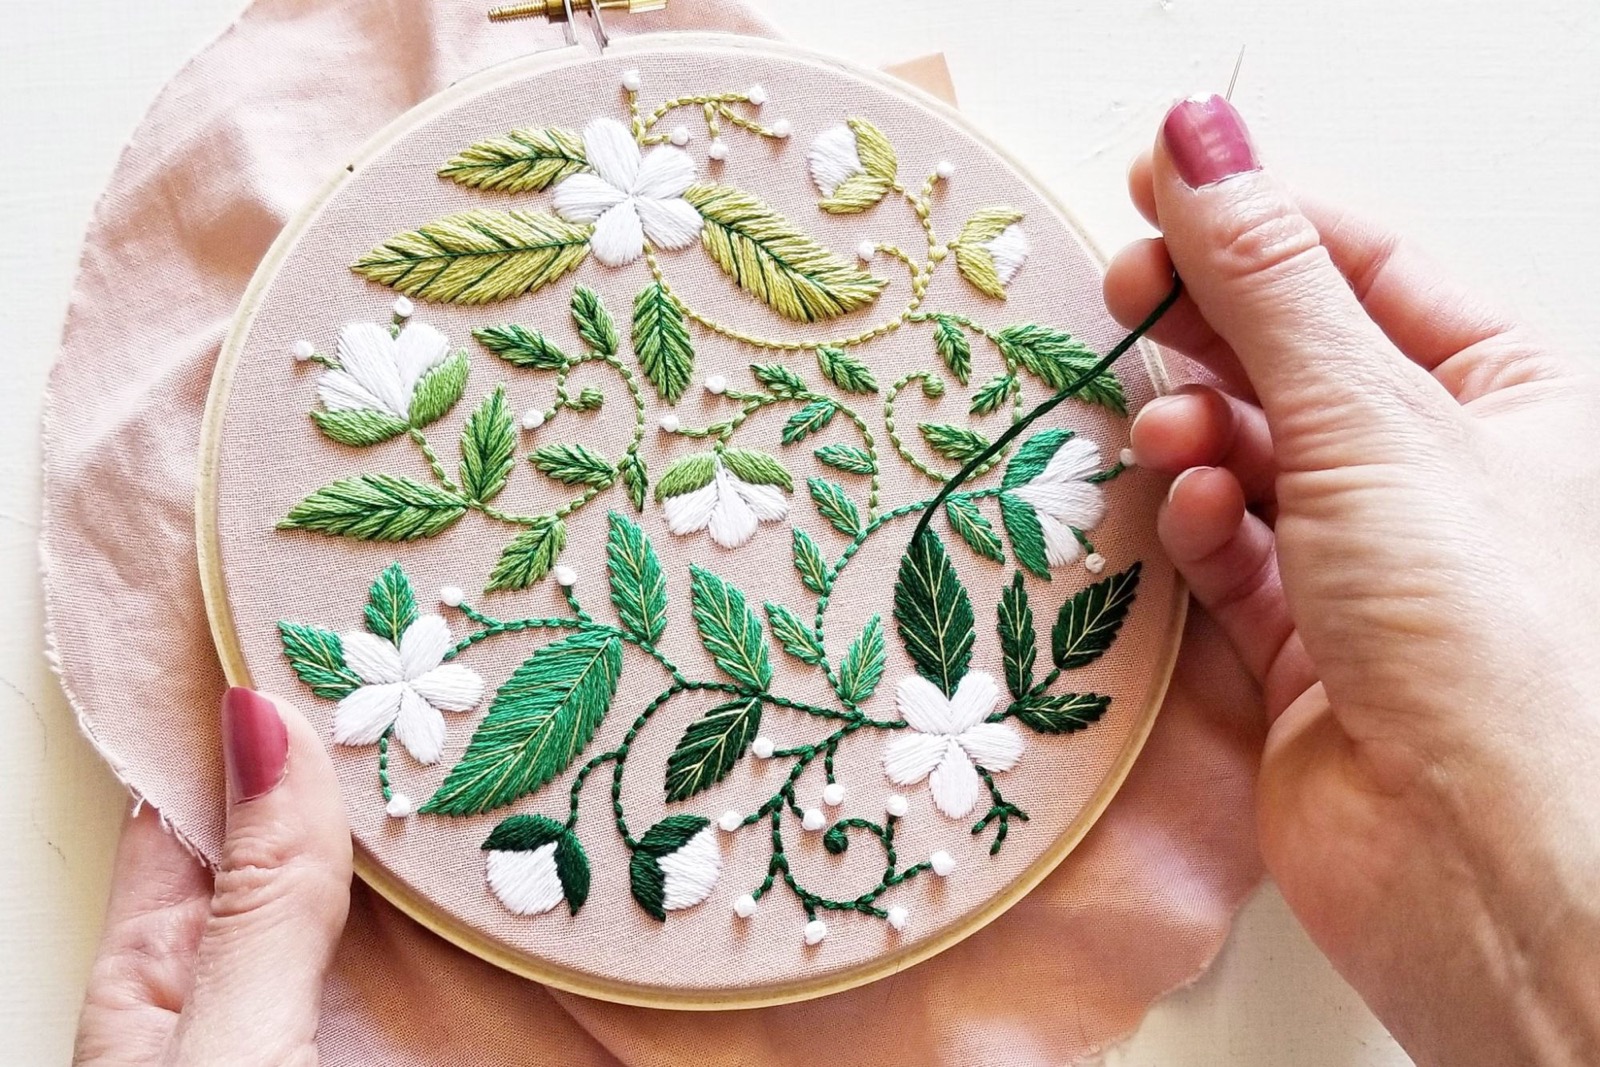 You got: Embroidery! Rate Some Classic TV Series and I’ll Pinpoint a Hobby for You to Master This Year